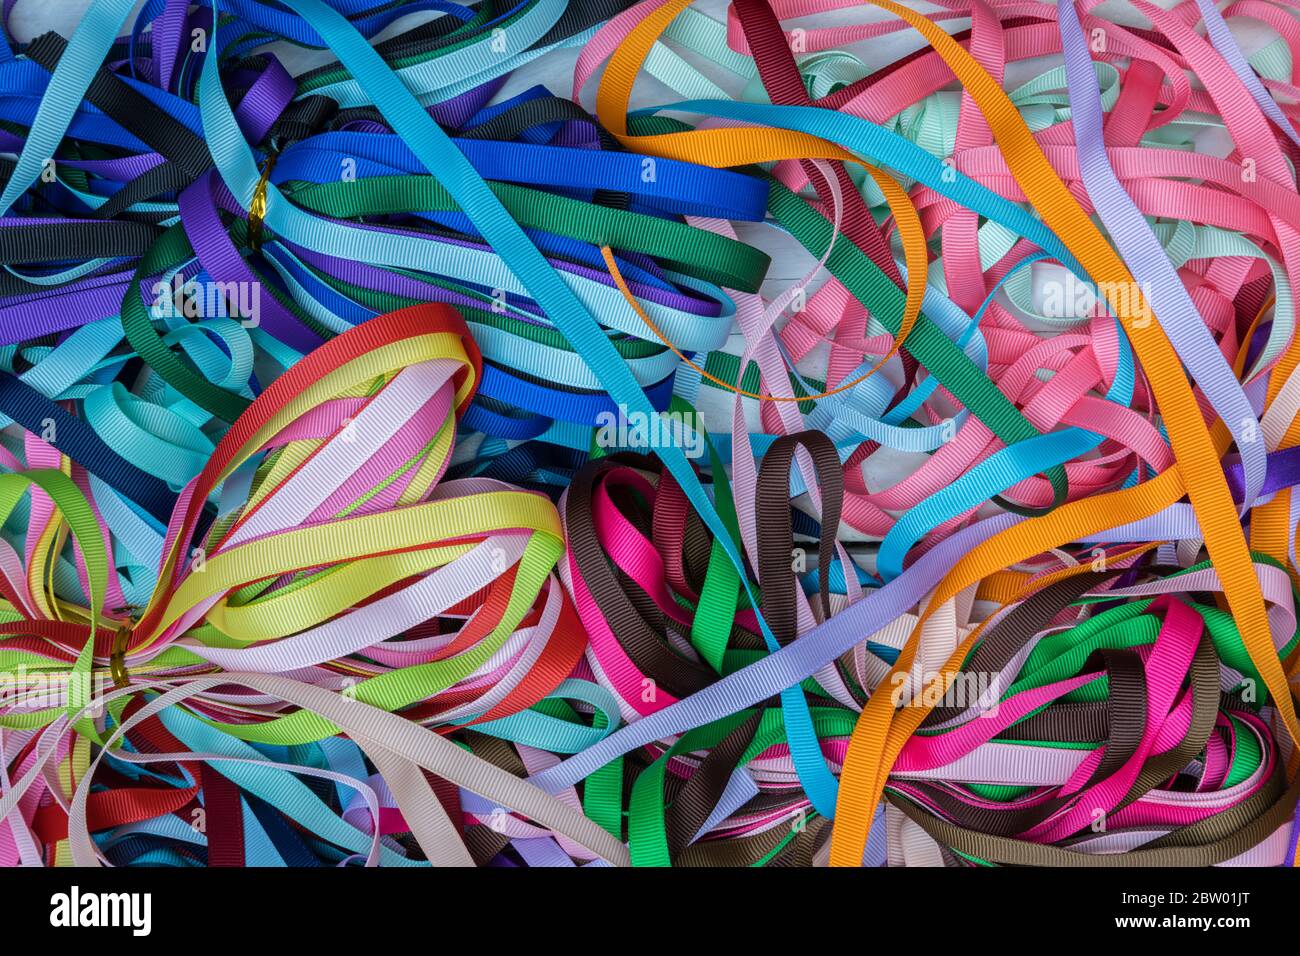 Many colorful gift ribbons filling the picture background Stock Photo